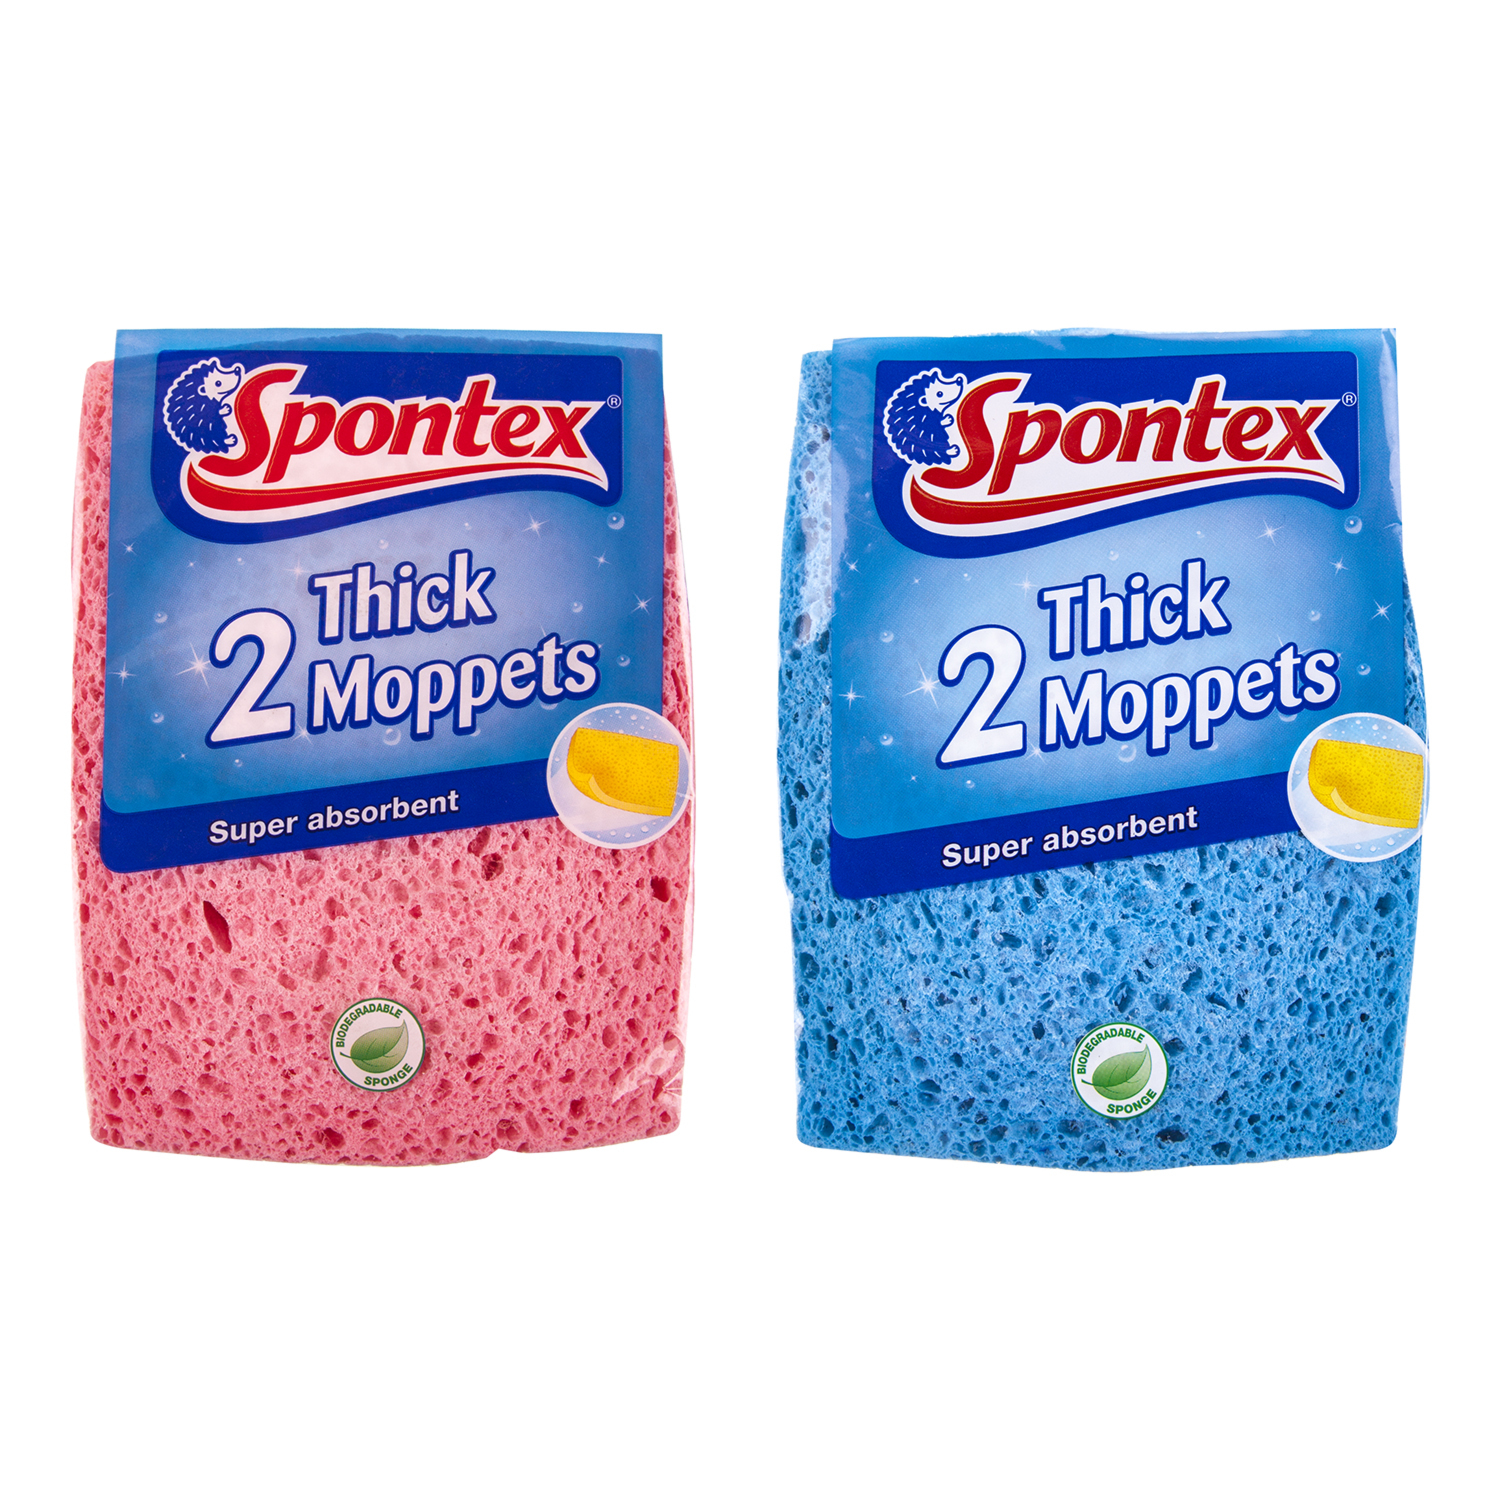 Pack of 2 Spontex Thick Moppets Image